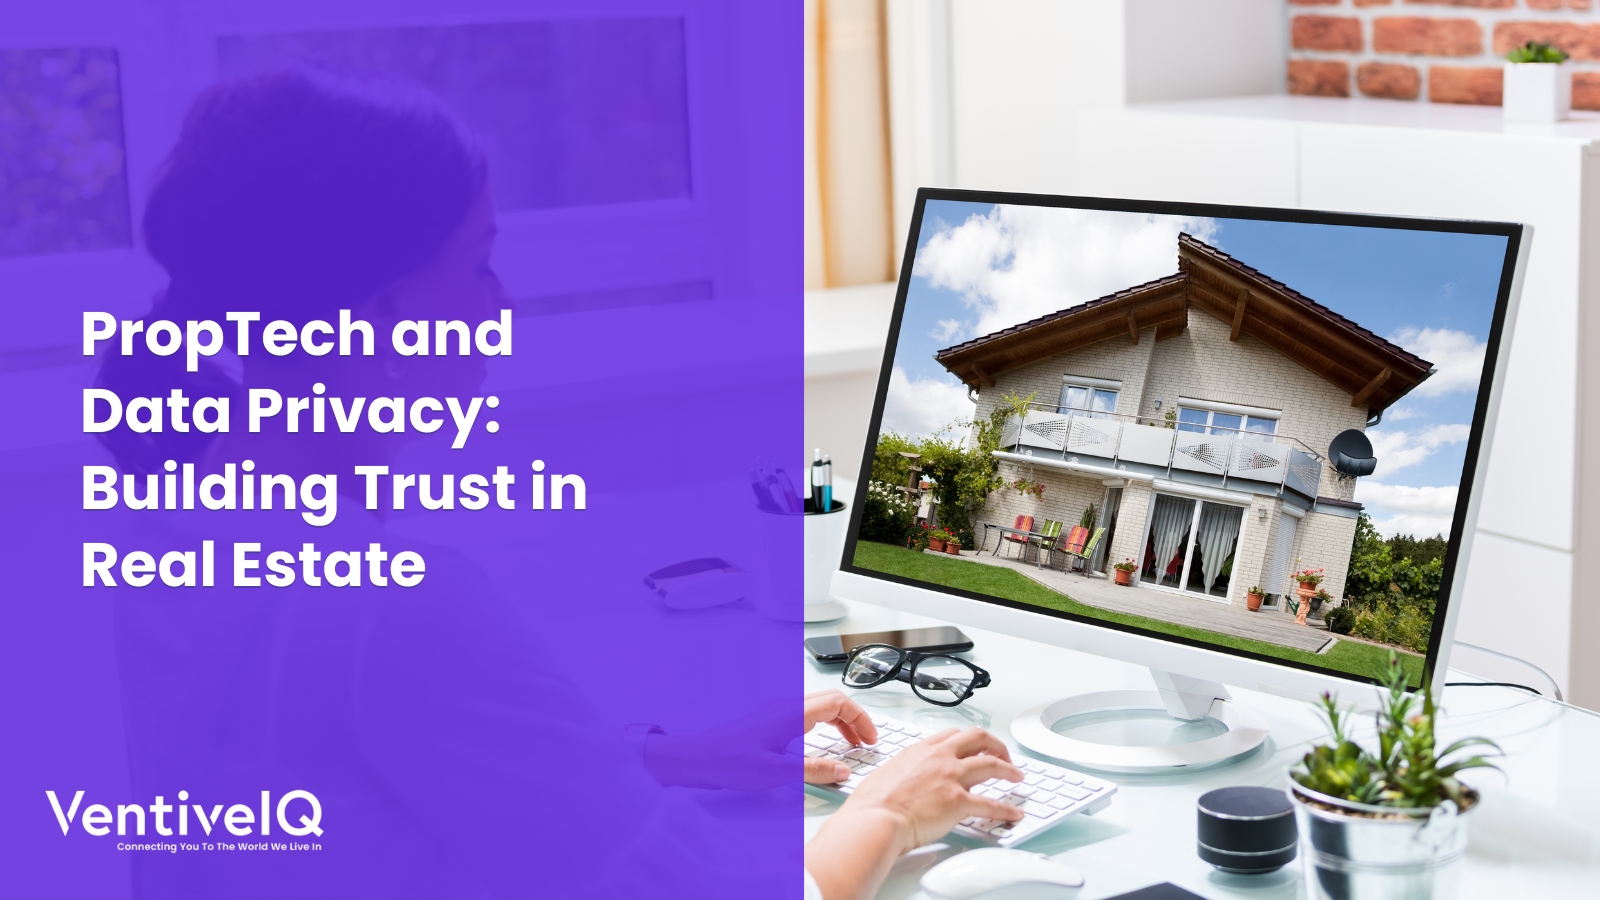 PropTech and Data Privacy: Building Trust in Real Estate